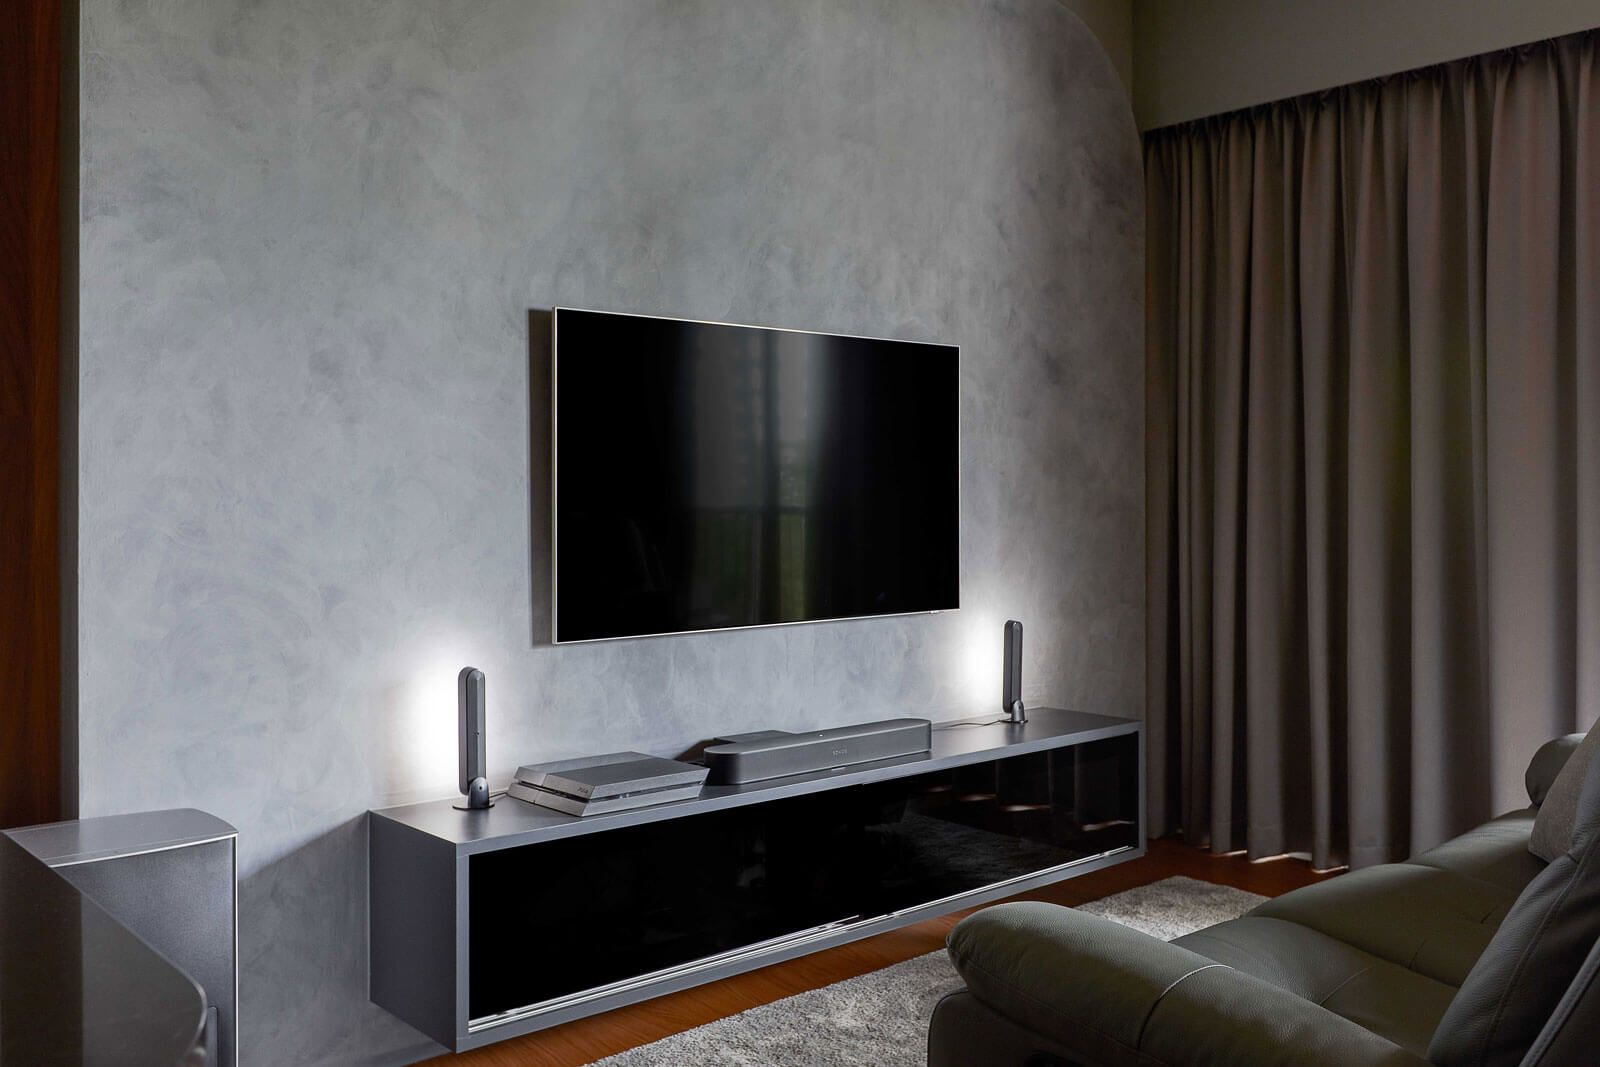 Sleek and contemporary TV wall design with mounted flat-screen TV, ambient lighting, and modern dark-toned console in a room with textured gray walls and elegant drapery.